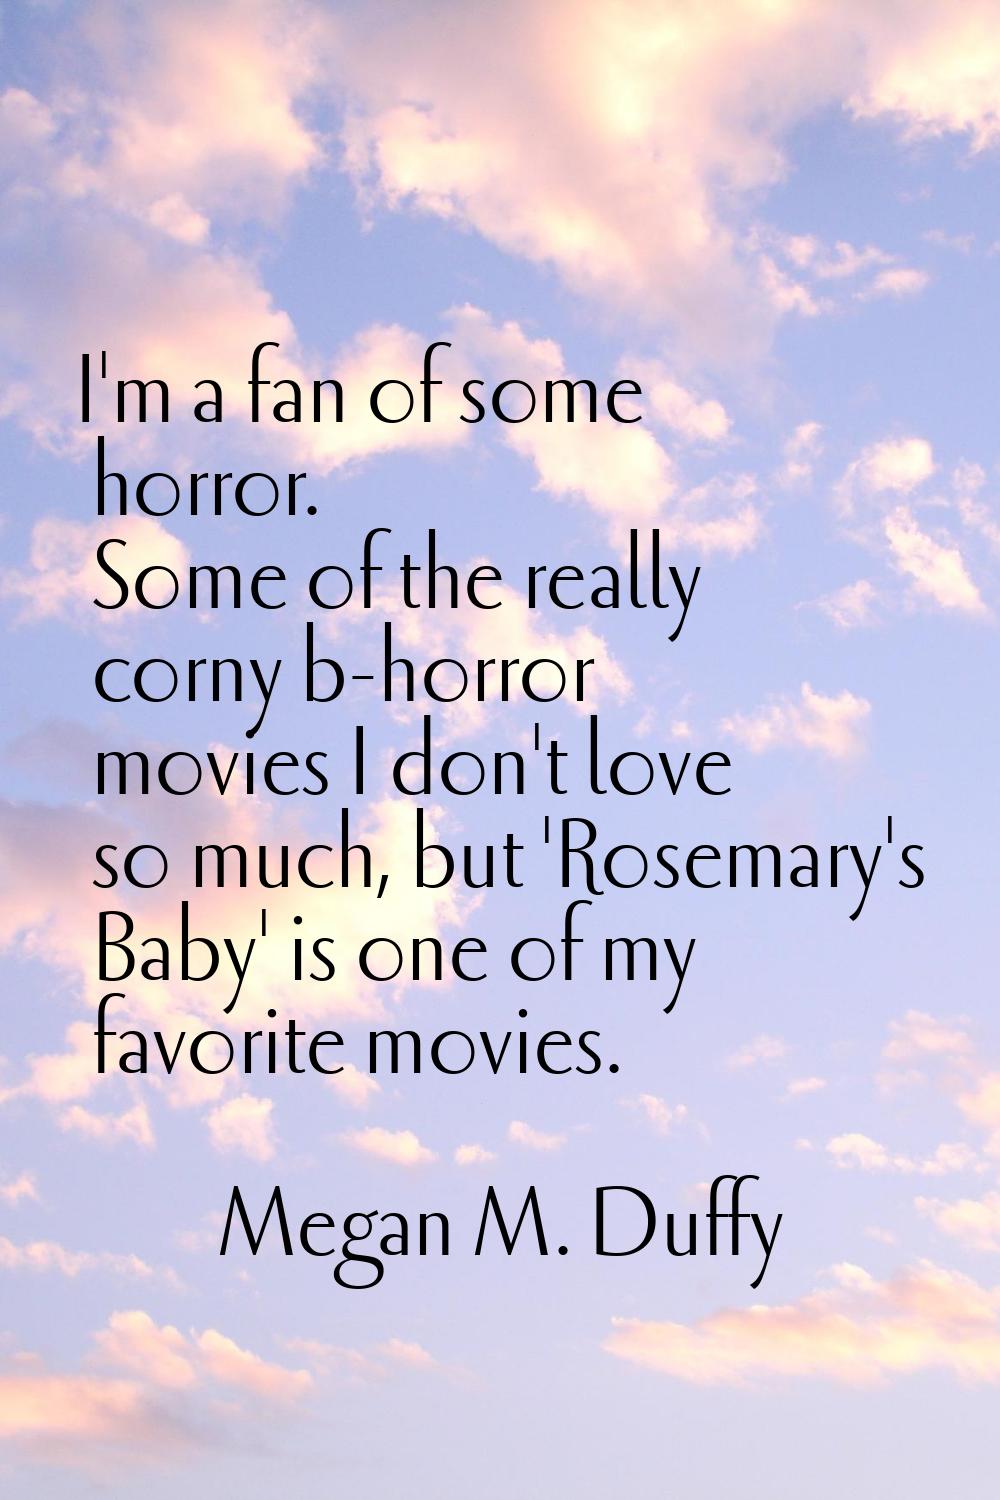 I'm a fan of some horror. Some of the really corny b-horror movies I don't love so much, but 'Rosem